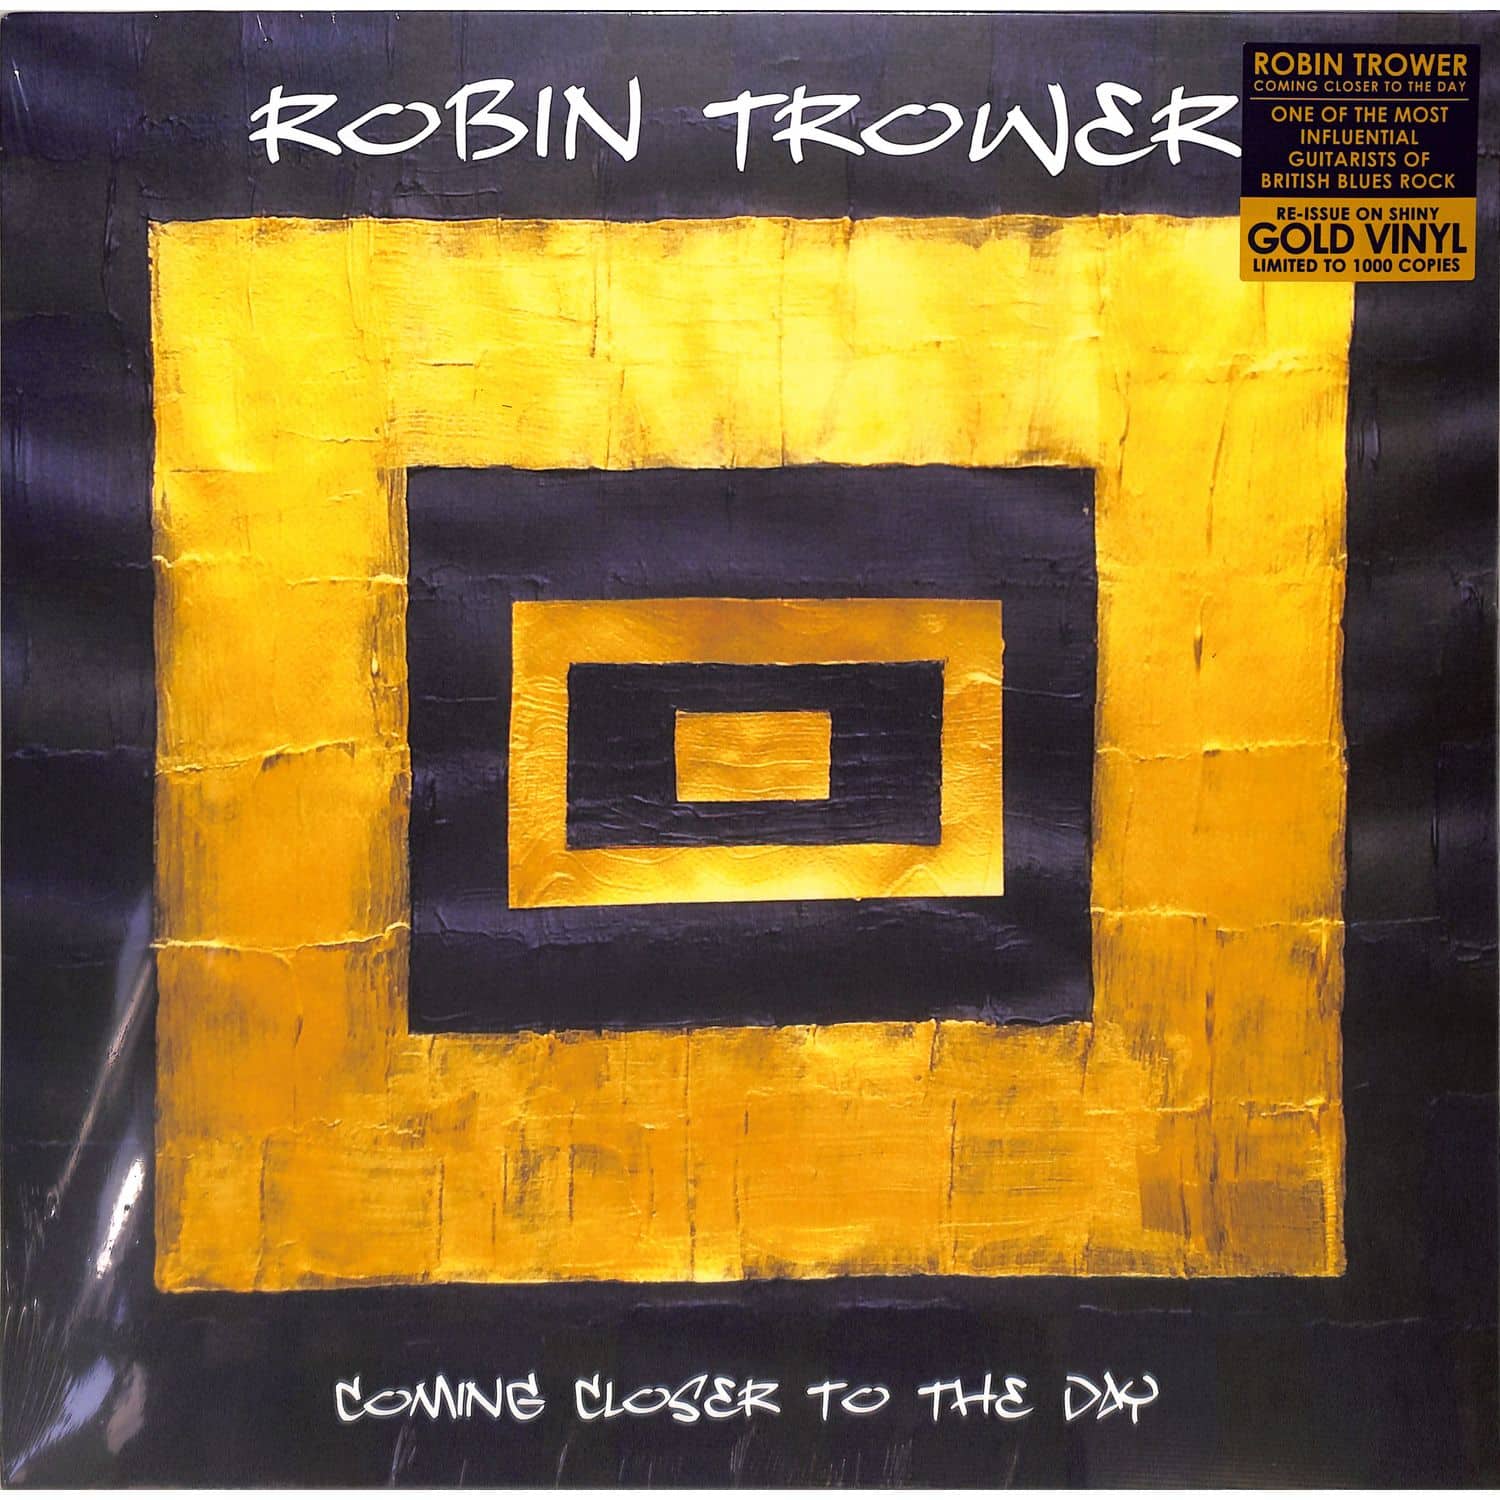 Robin Trower - COMING CLOSER TO THE DAY 